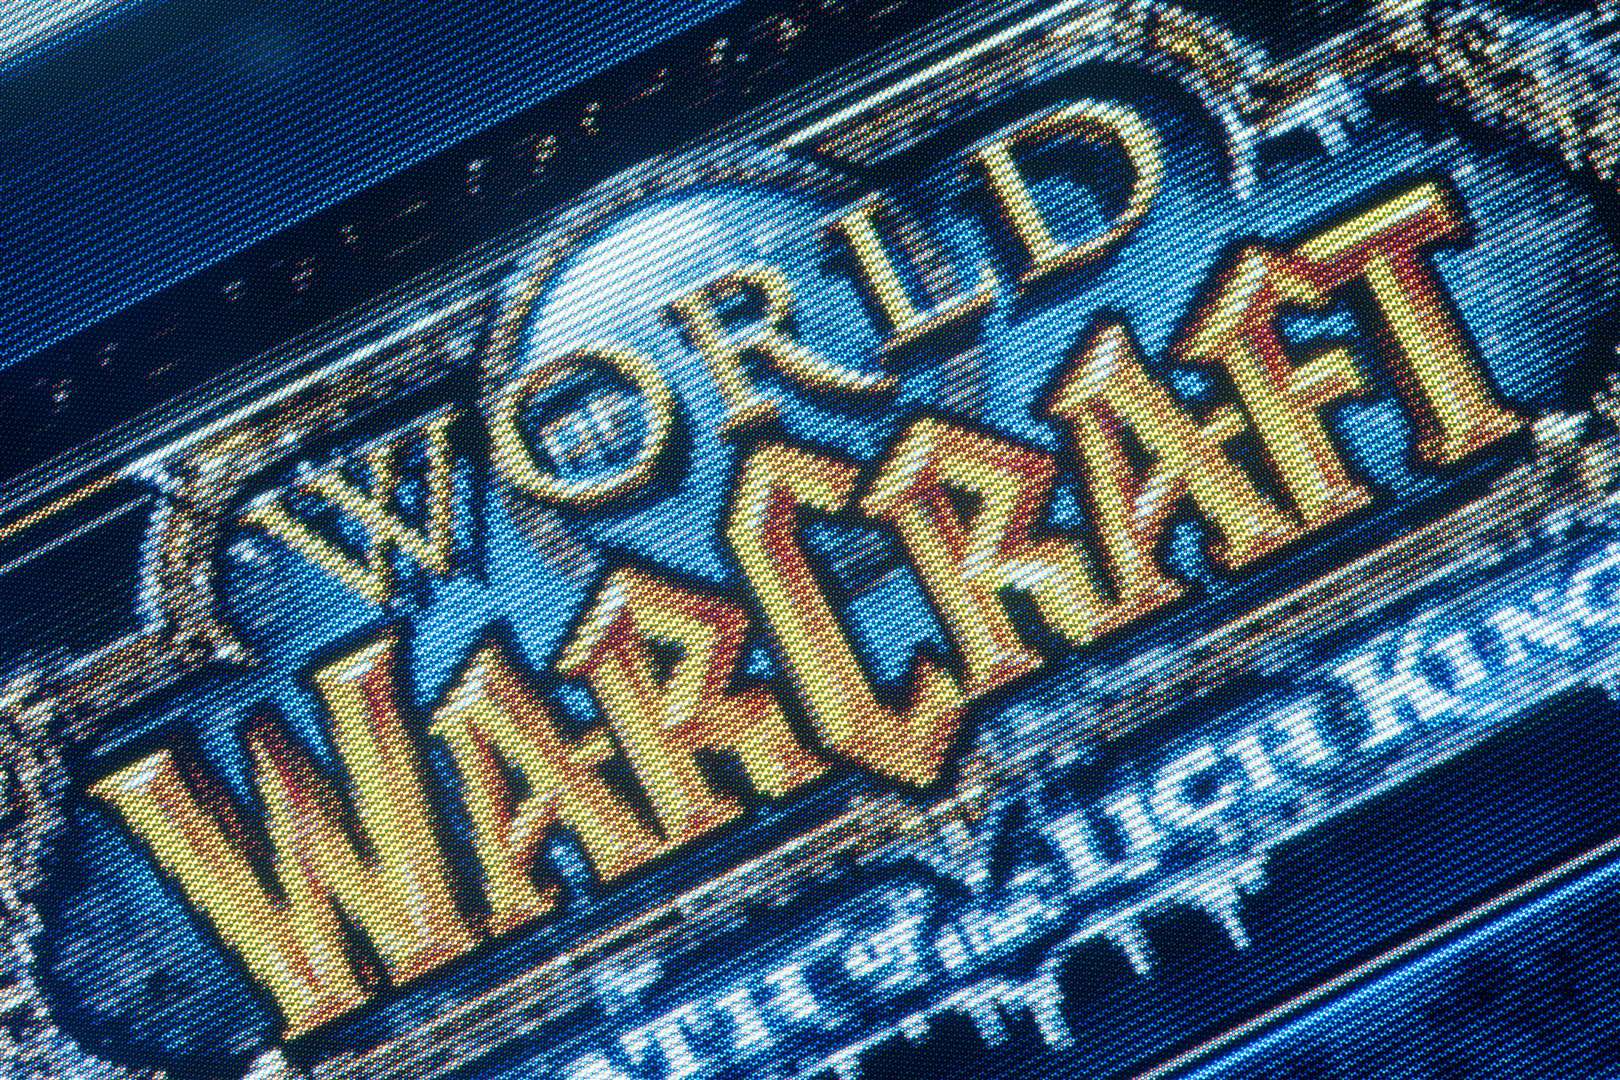 World Of Warcraft became globally popular after it was released by Blizzard Entertainment in 2004 (Paul Carstairs/Alamy/AP)